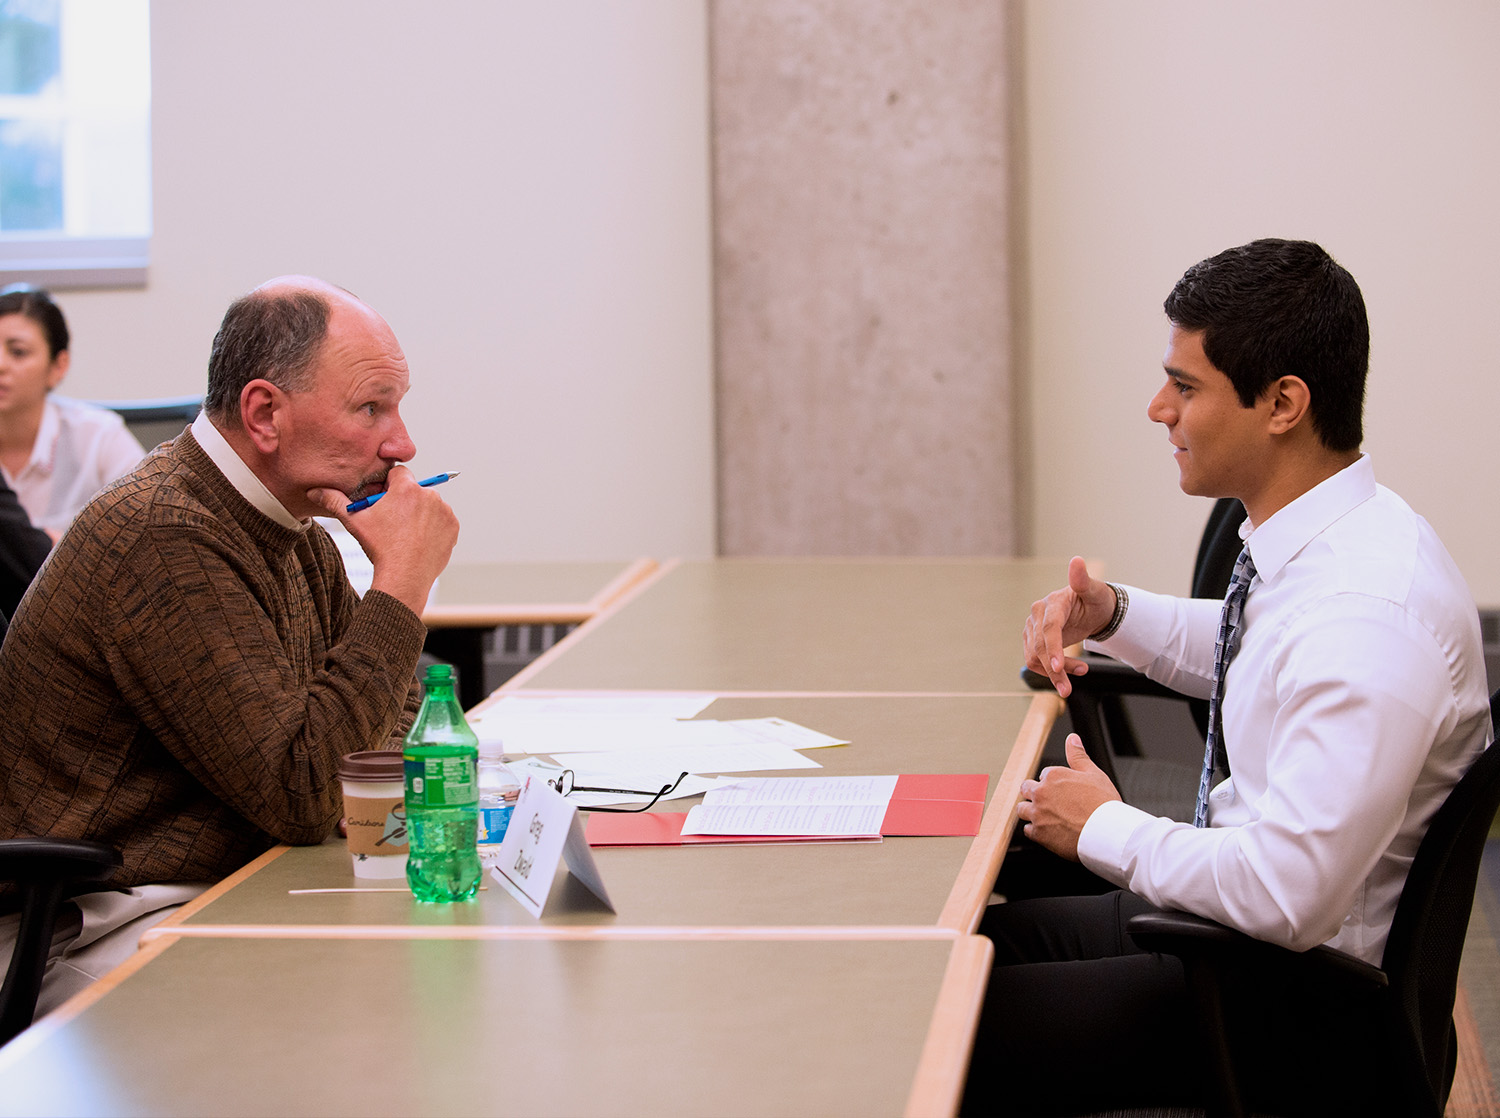 A student participates in a mock interview with a professor